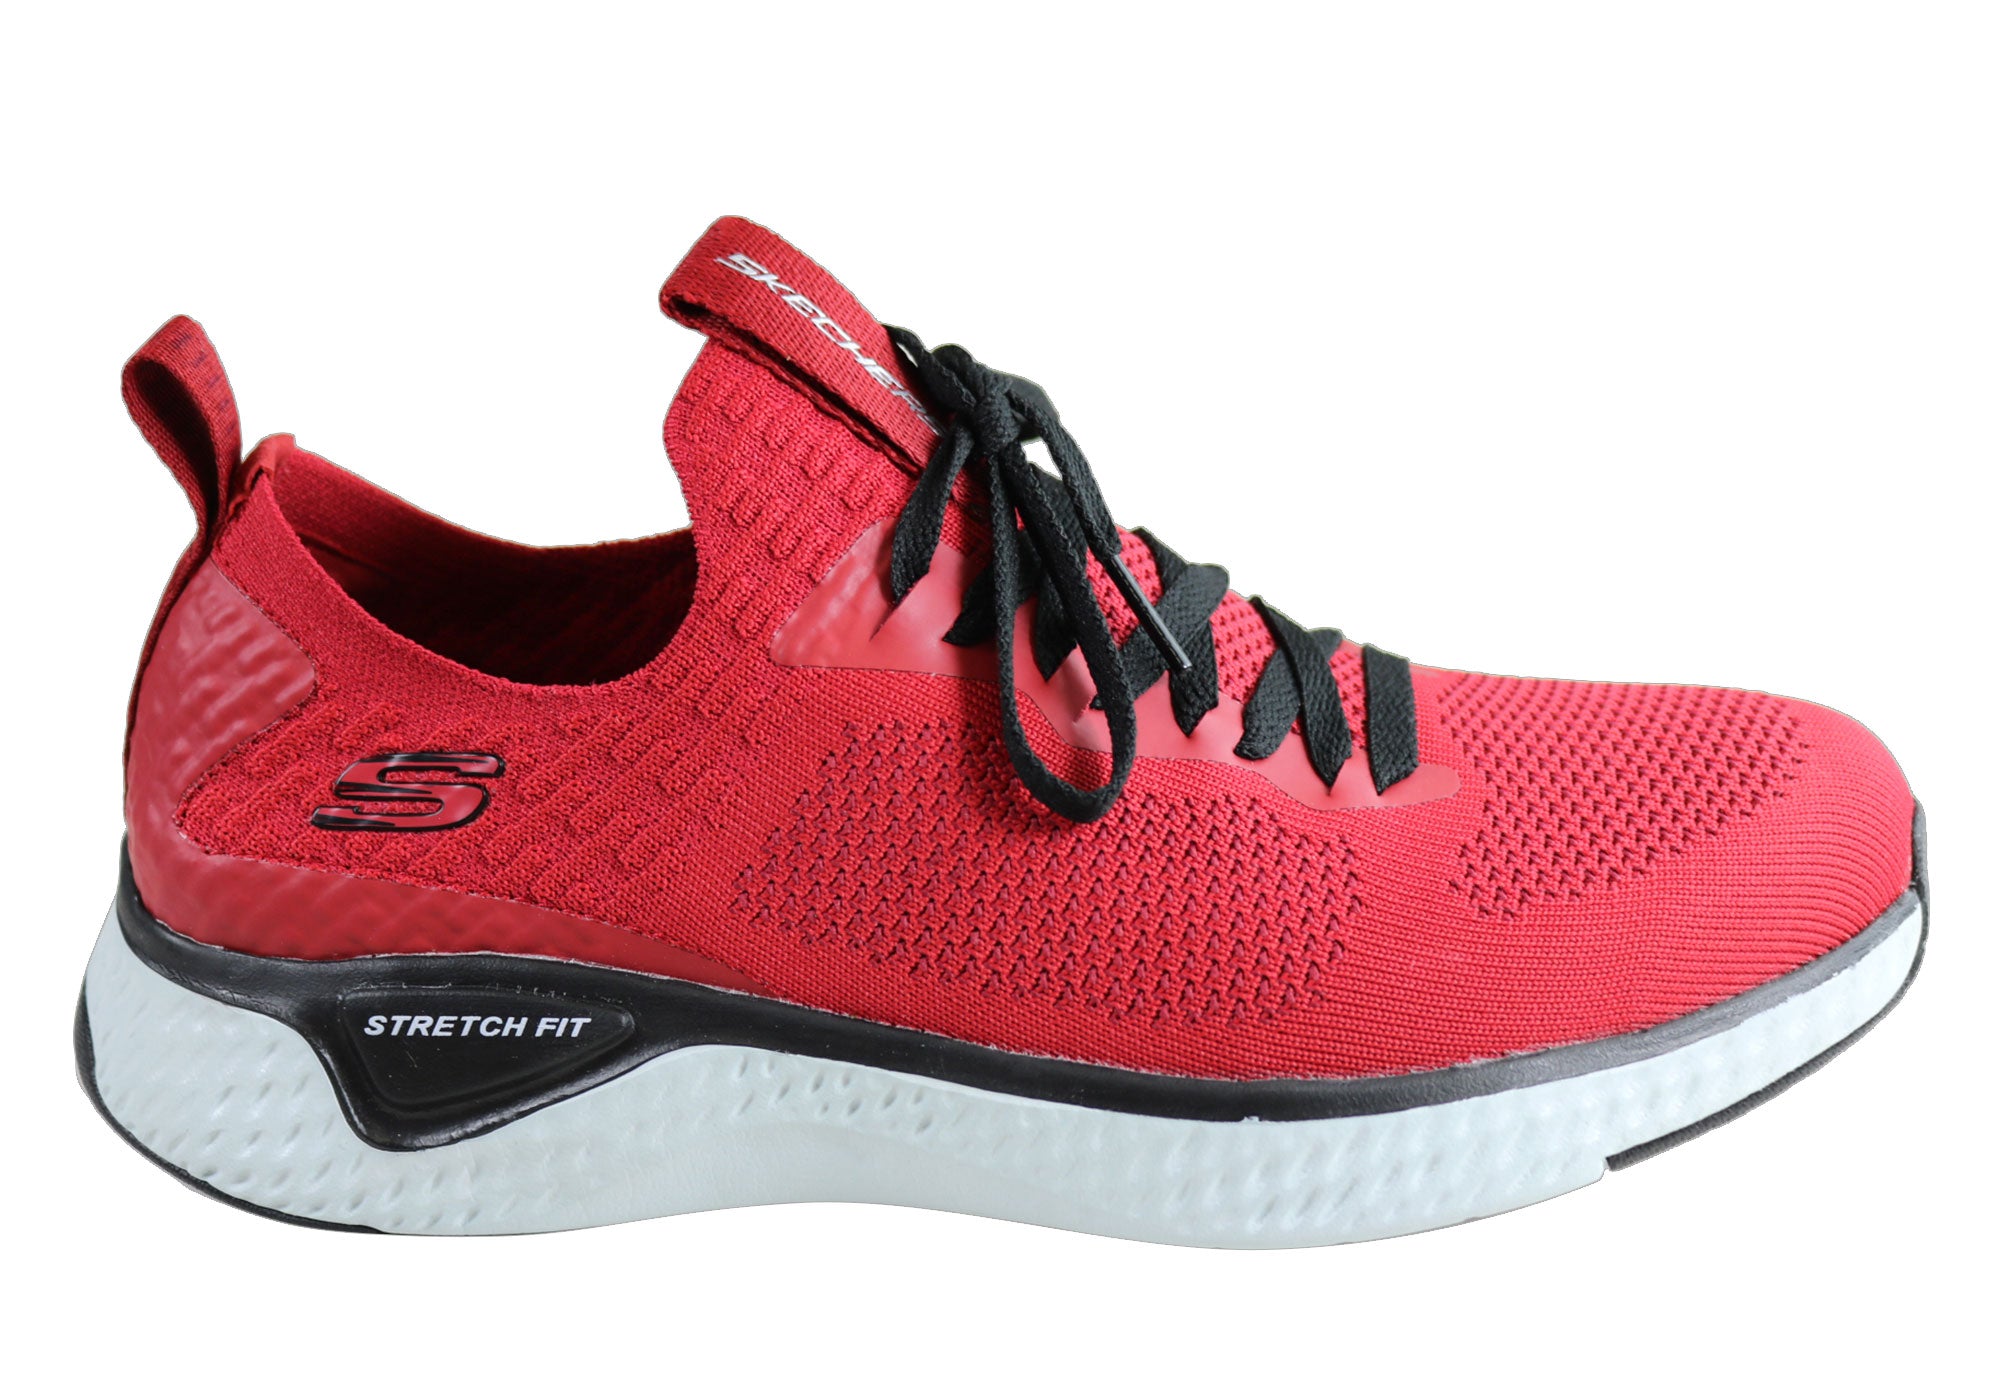 skechers stretch fit sneakers